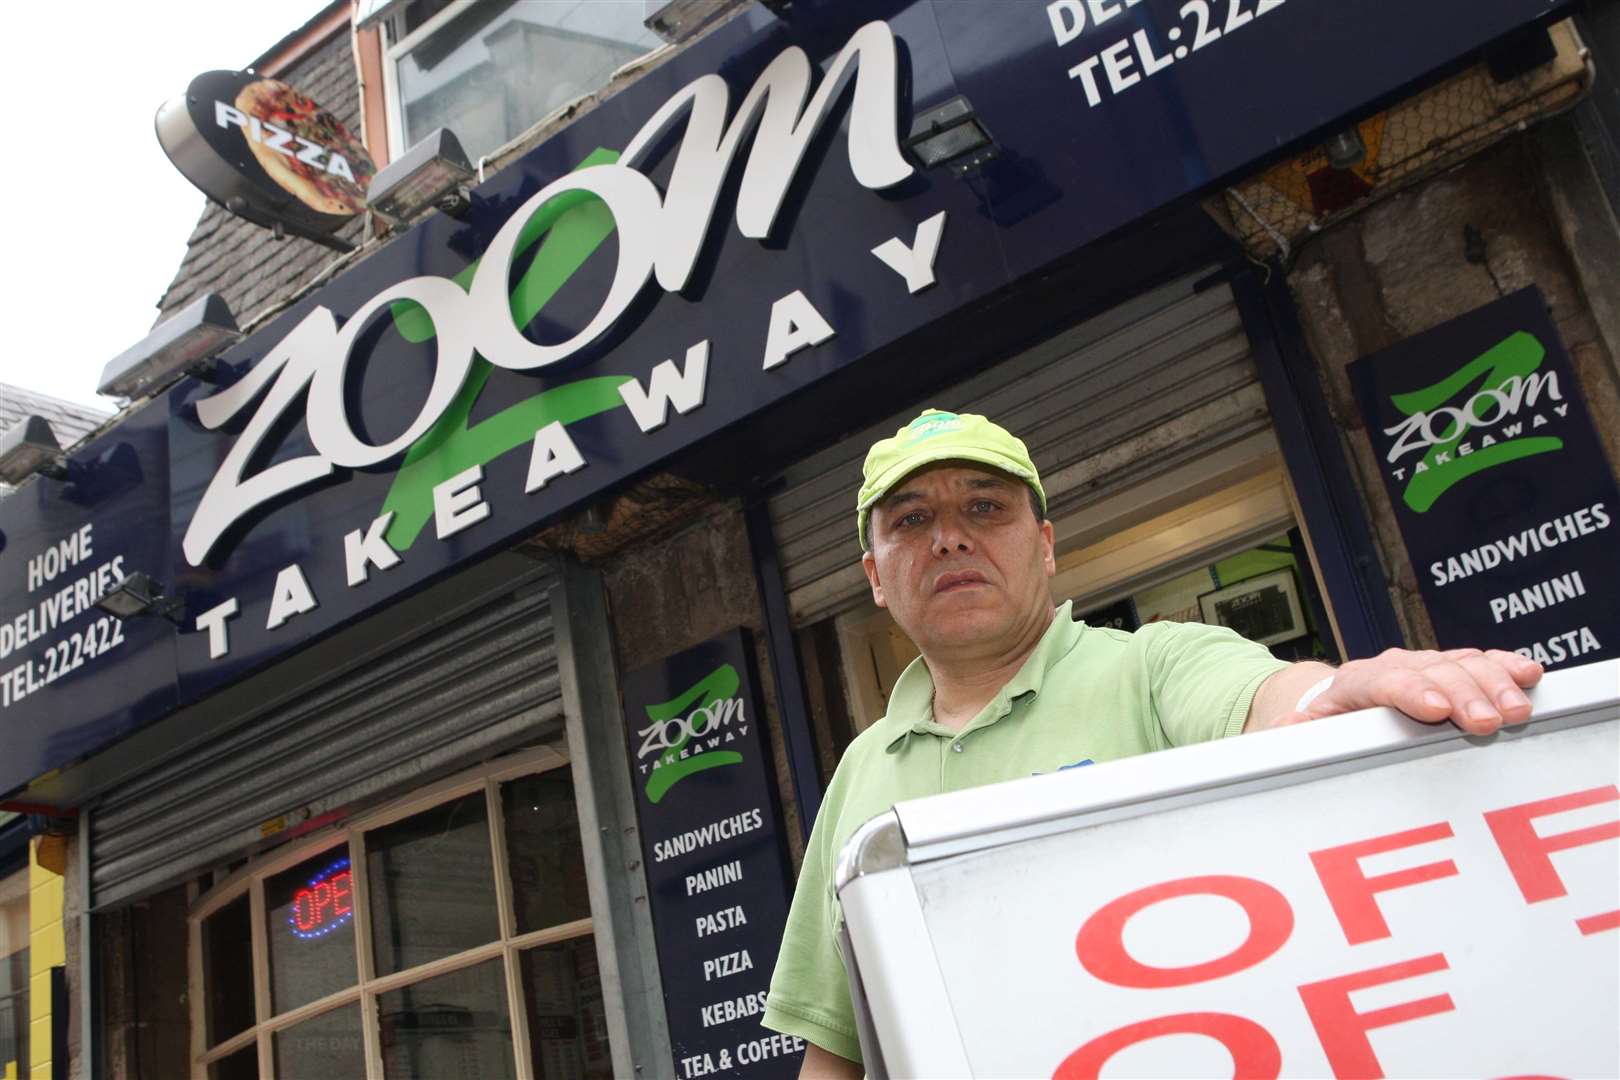 Mohammed Afif who is the owner of Zoom takeaway.